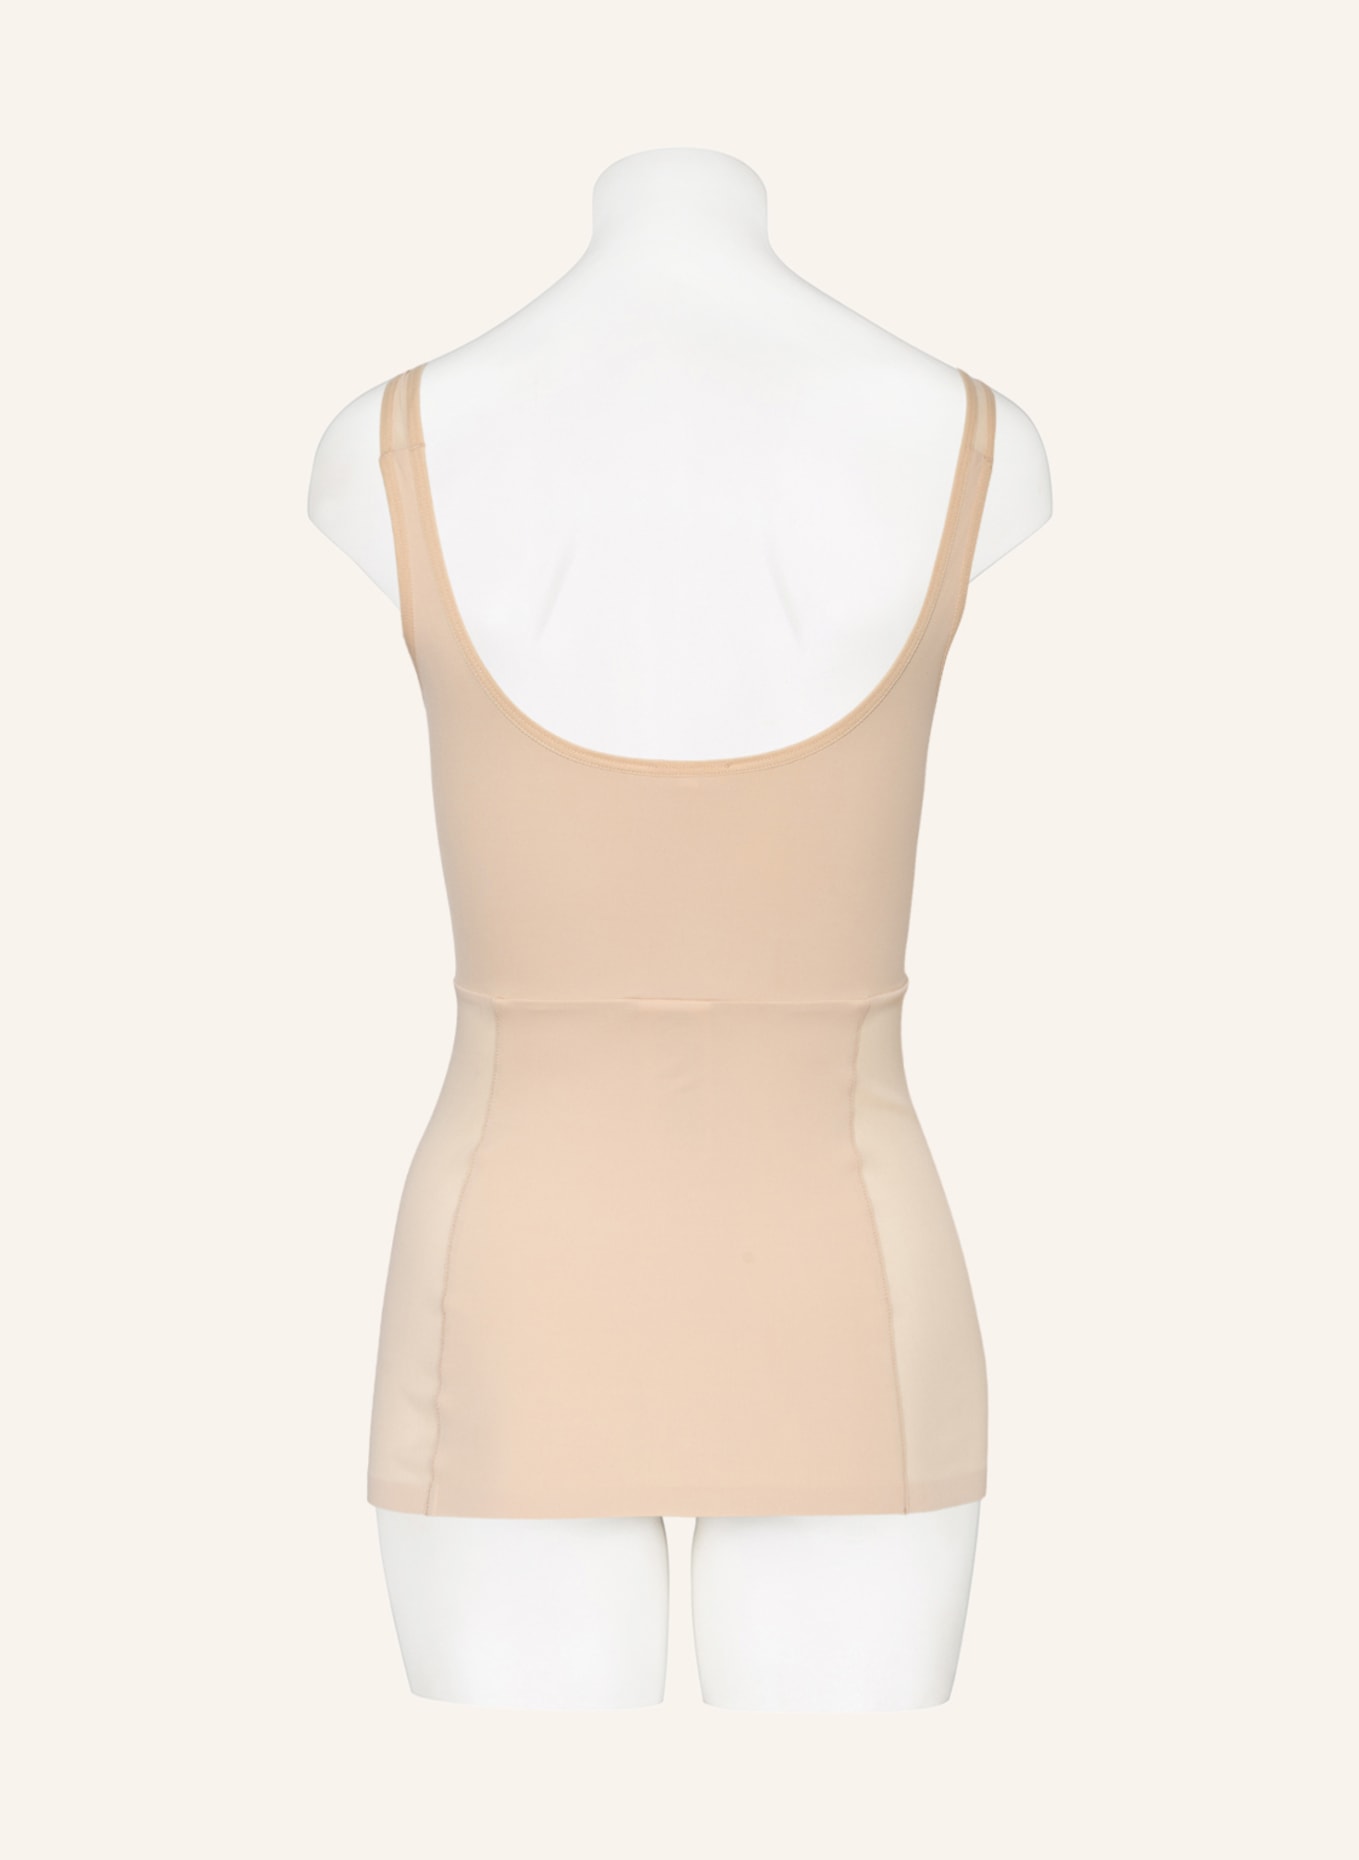 ITEM m6 Shapewear — choose from 9 from 29,99 €